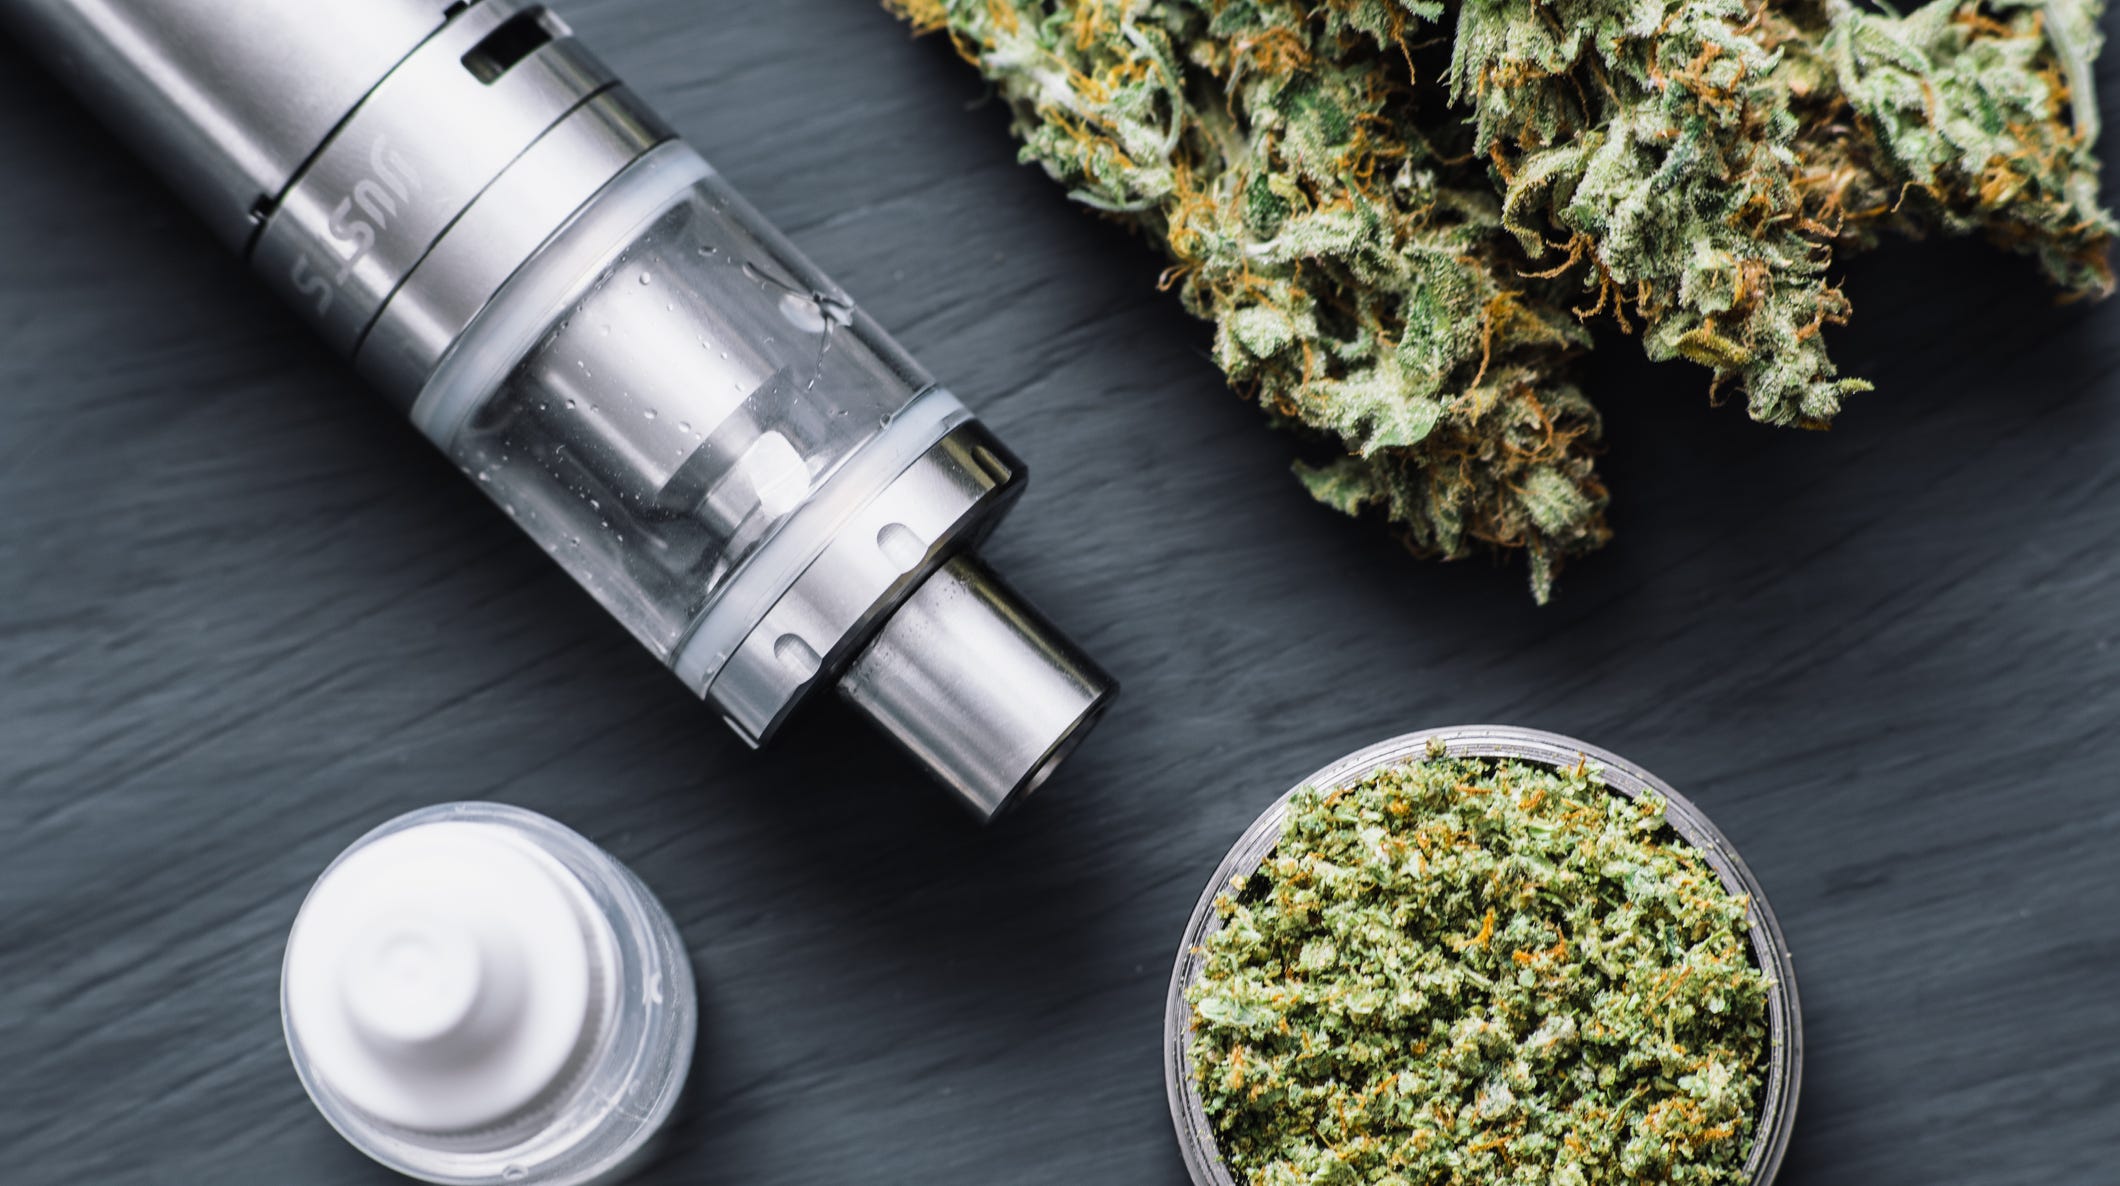 Vaping risks: Worse with THC oil and 4 other things you need to know